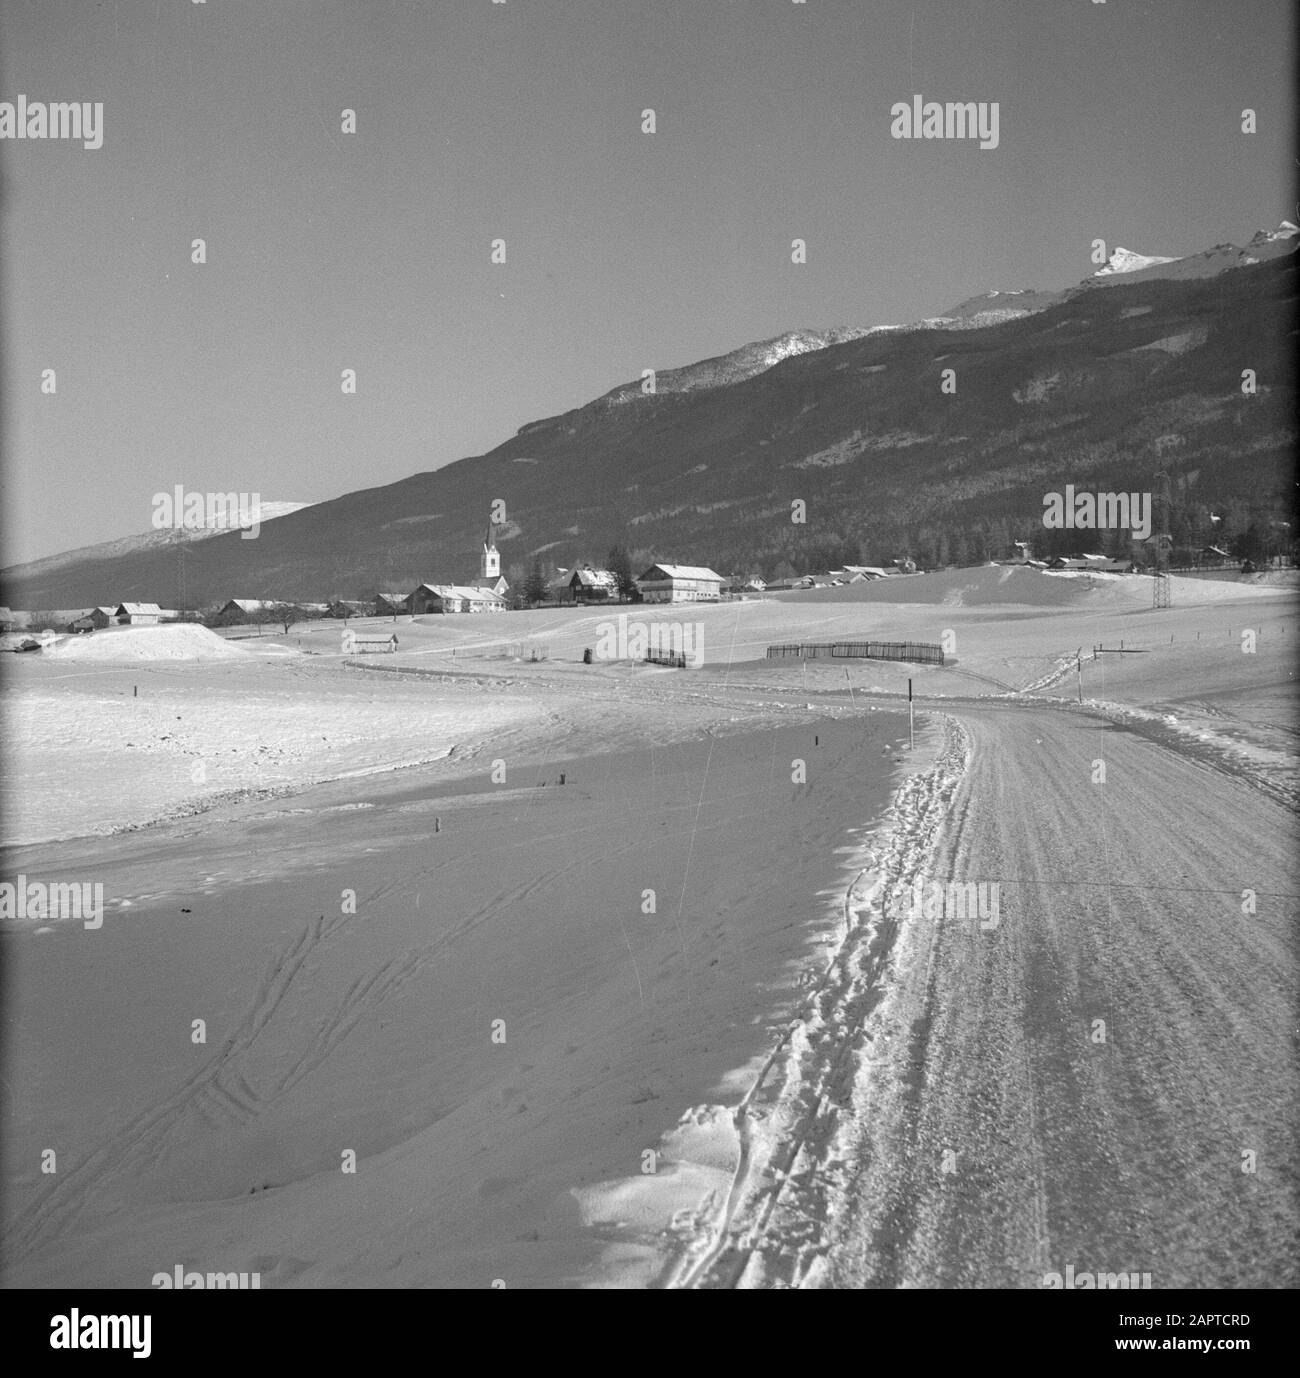 Winter in Tyrol  View of Sistrans in the snow Date: January 1960 Location: Austria, Sistrans, Tyrol Keywords: mountains, villages, church buildings, landscapes, snow, winter, homes Stock Photo